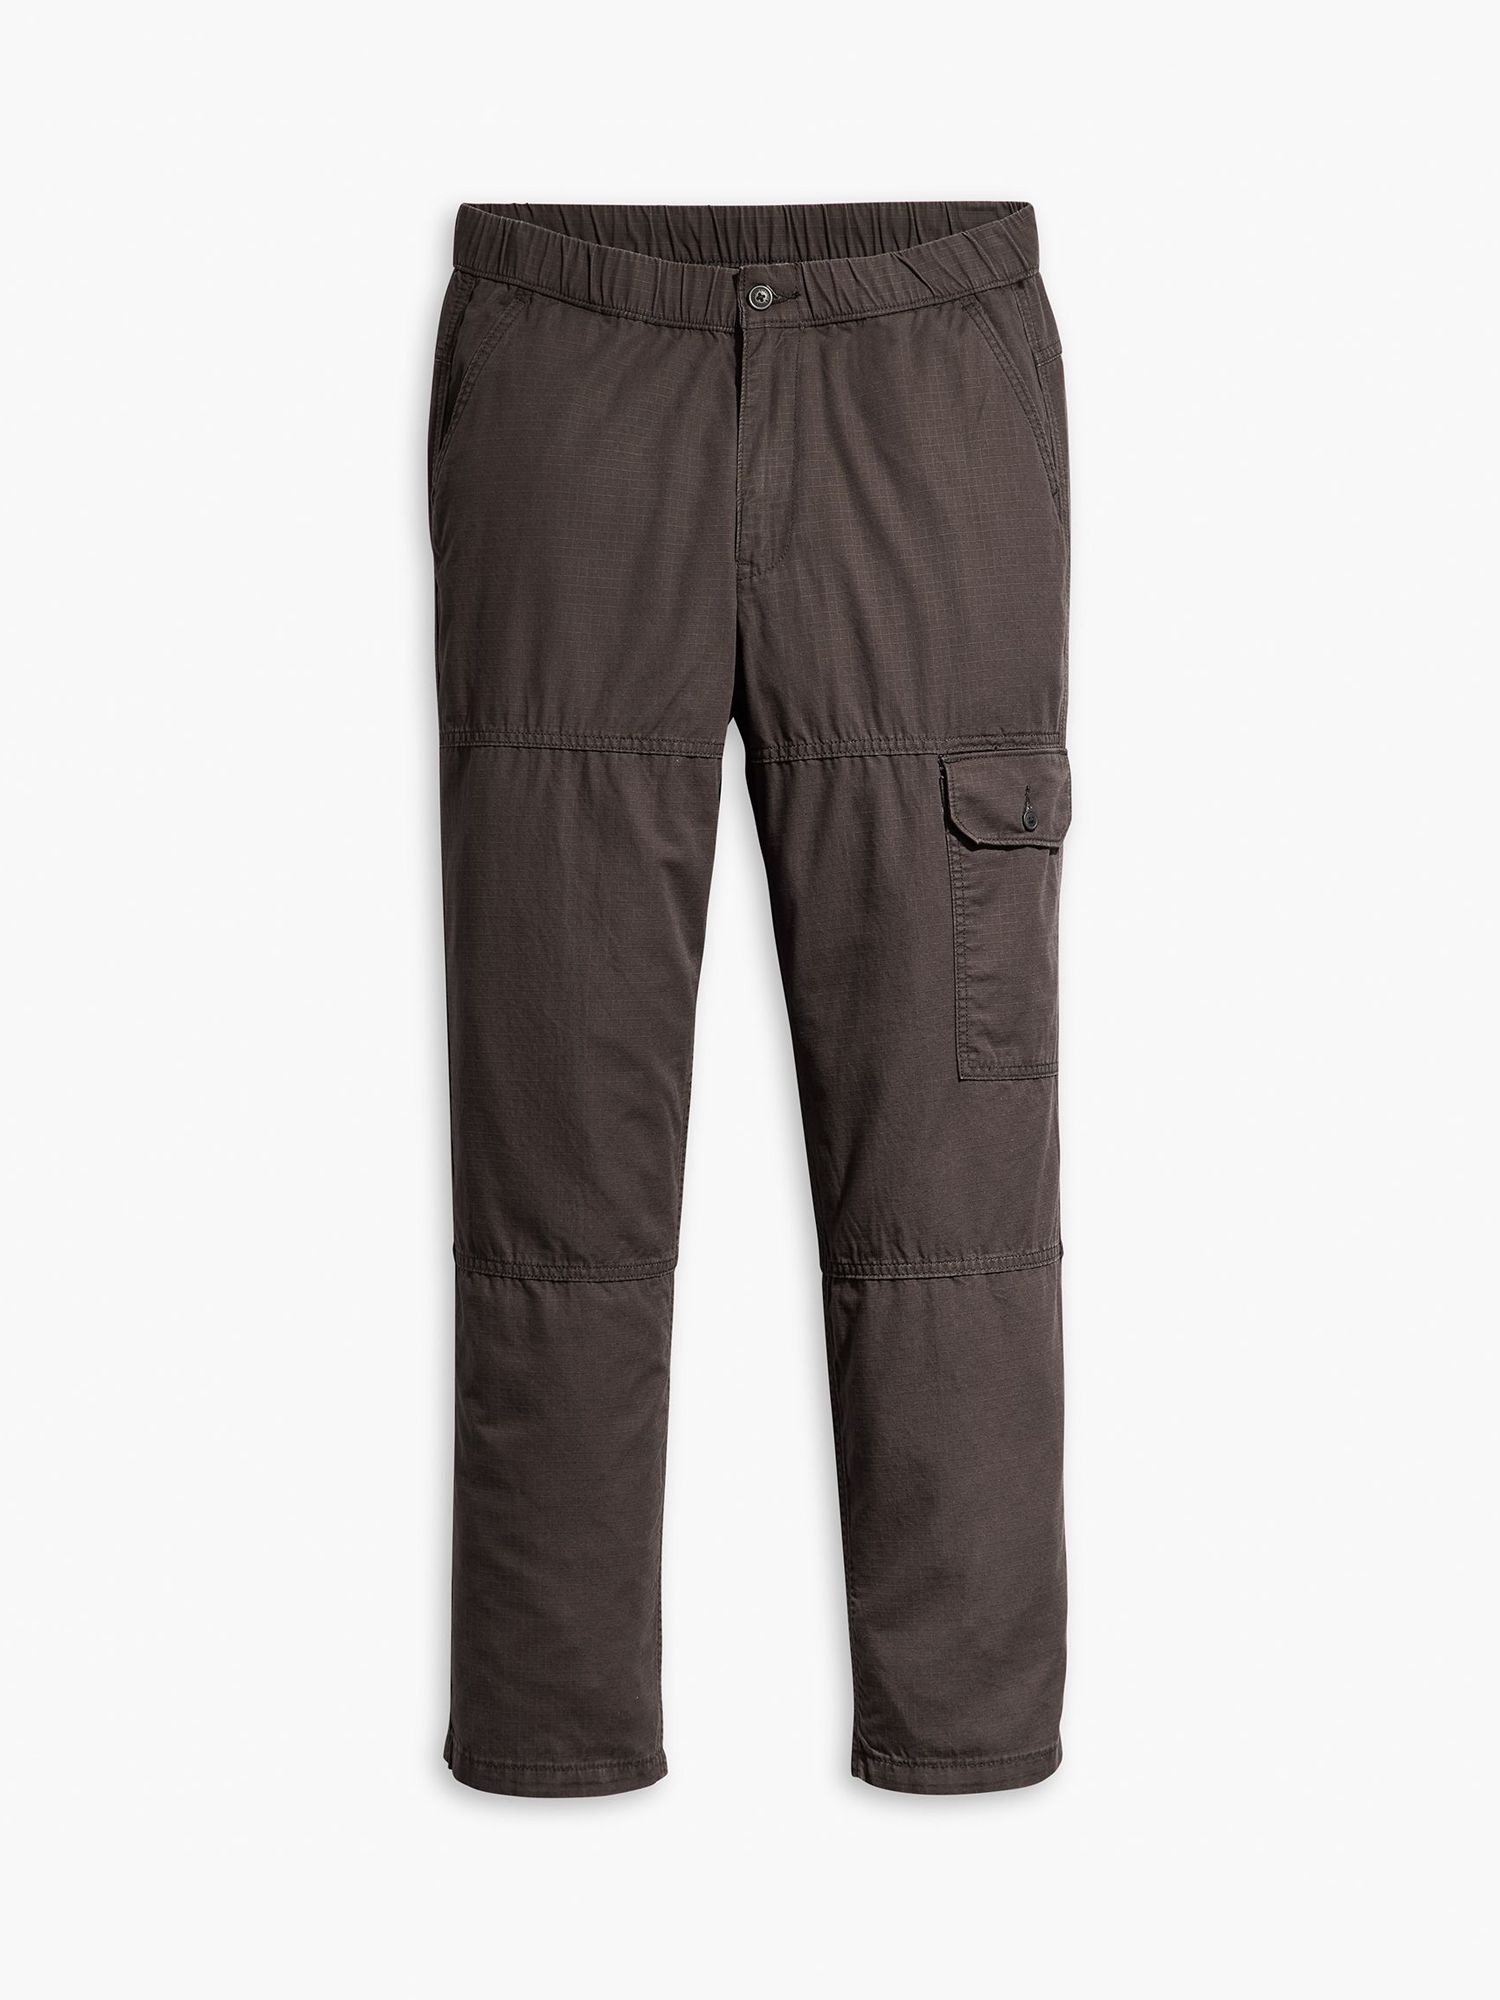 Buy Levi's Patch Pocket Cargo Trousers Online at johnlewis.com